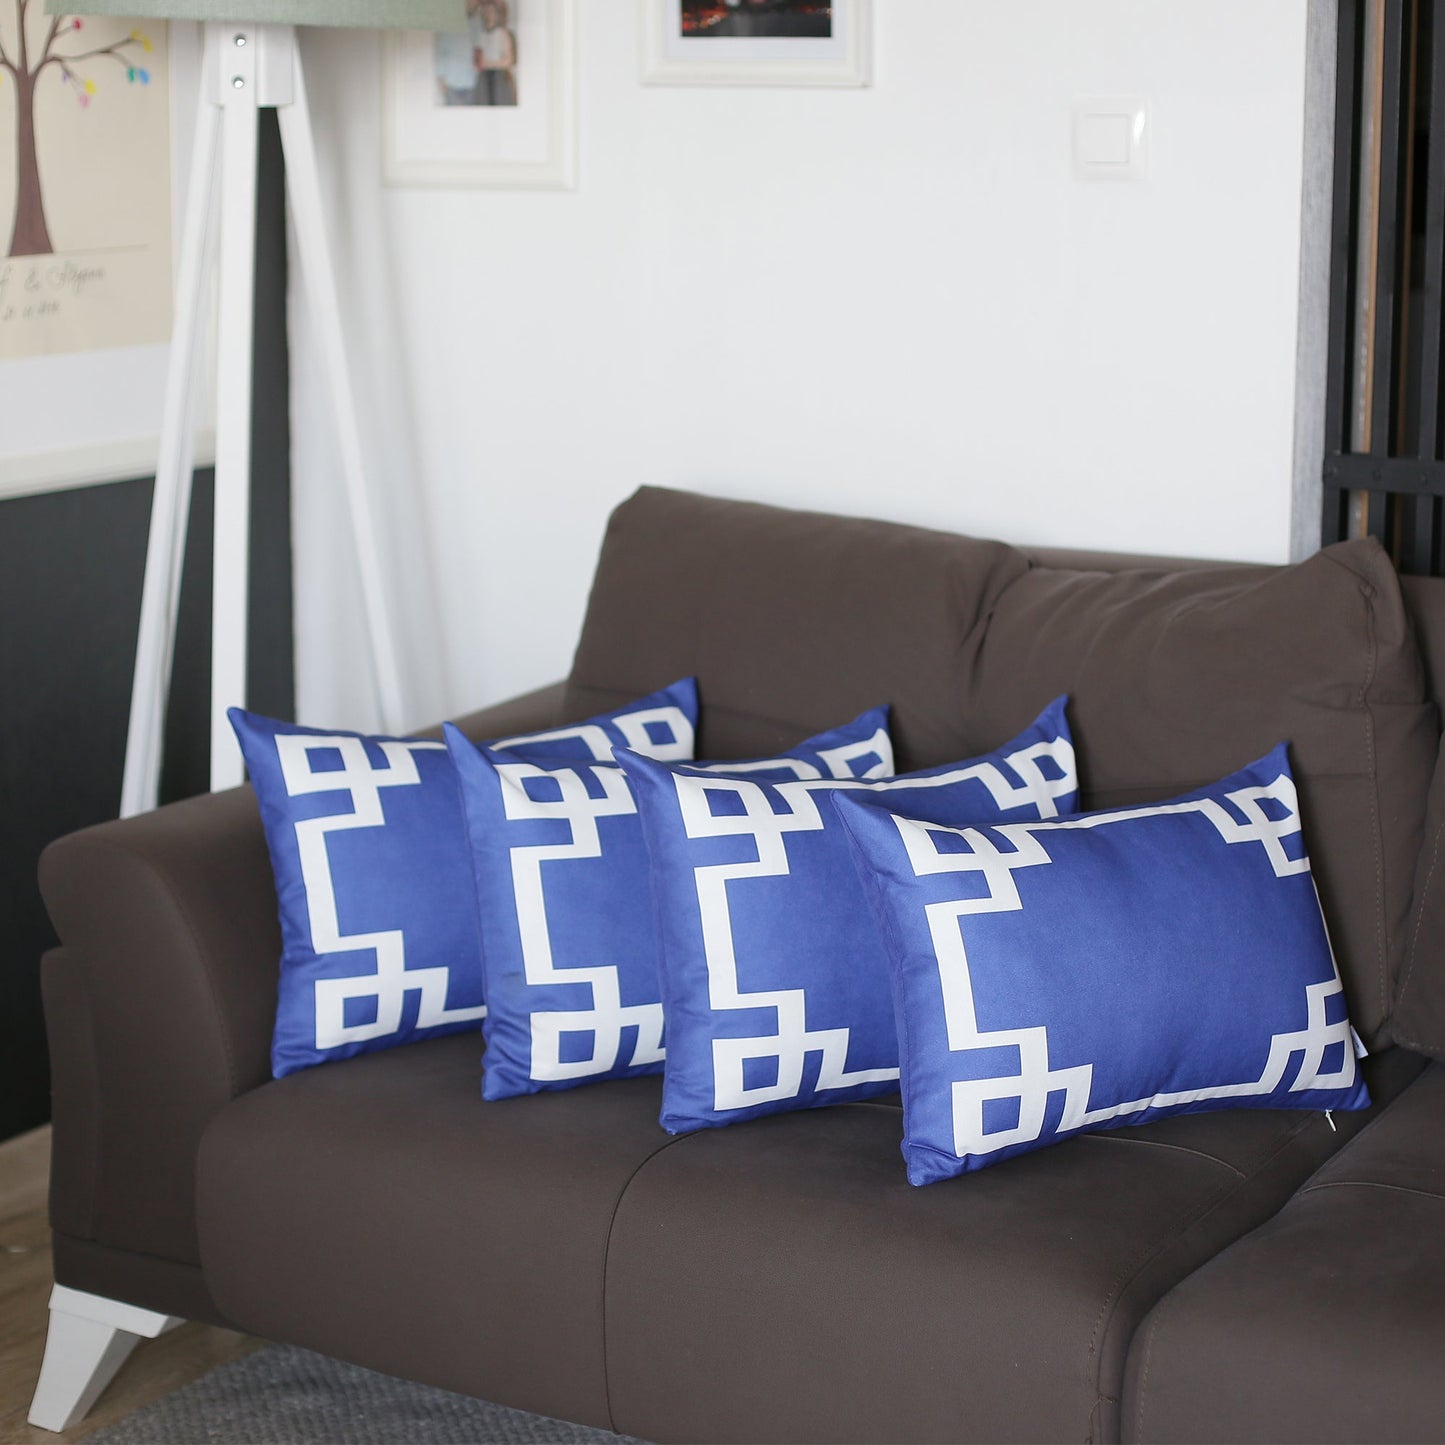 Geometric Blue&White Square Throw Pillow Cover (Set of 4)